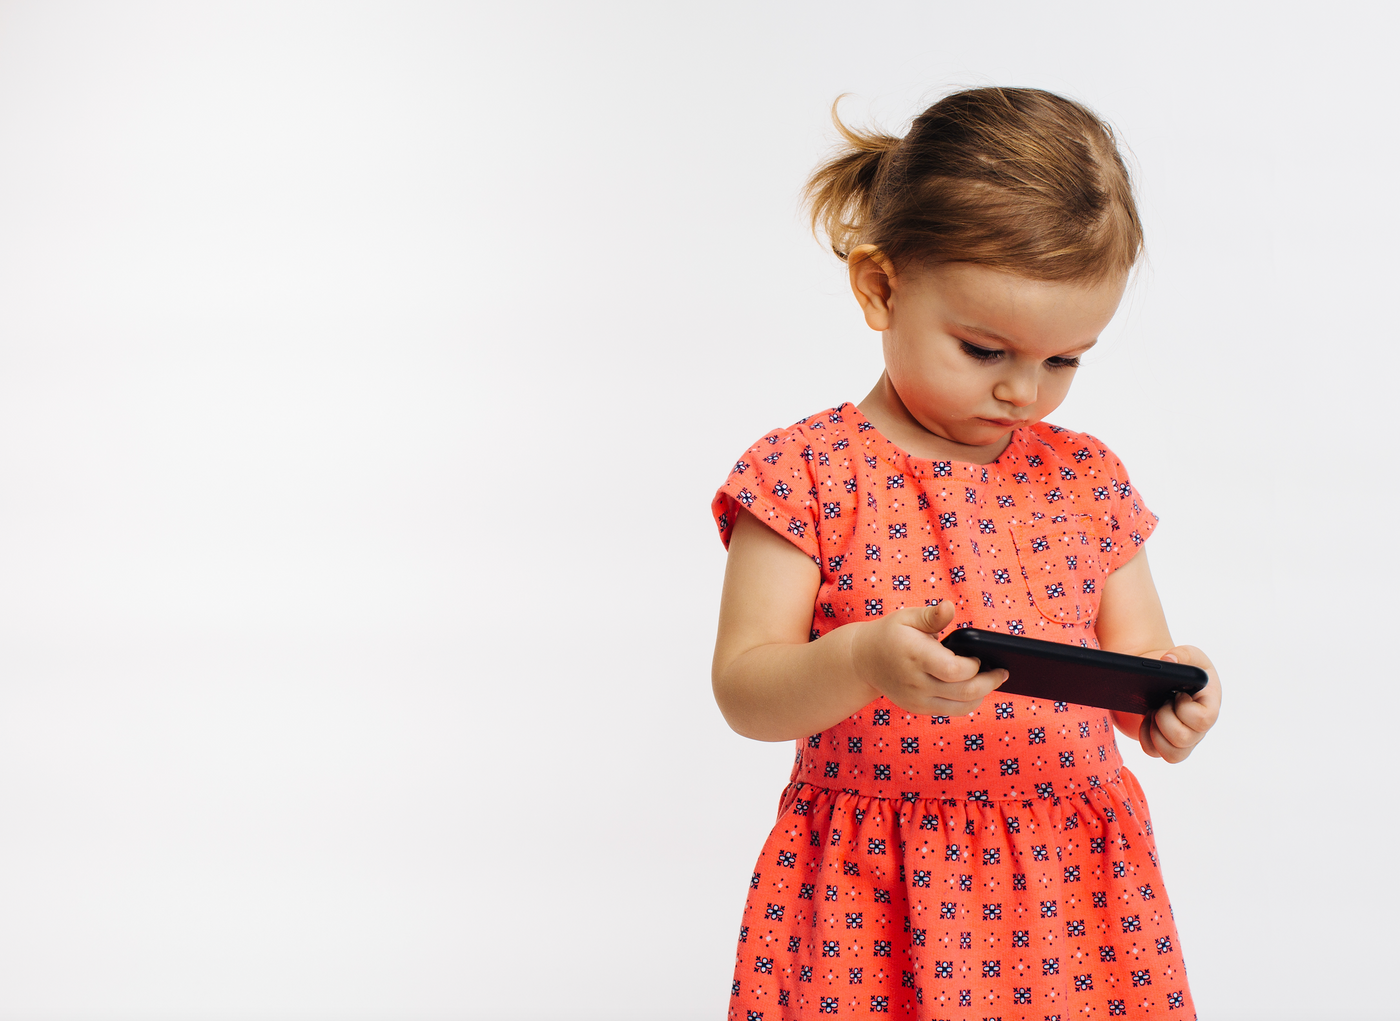 Does Your Screen Time Interrupt Your Relationship With Your Child?